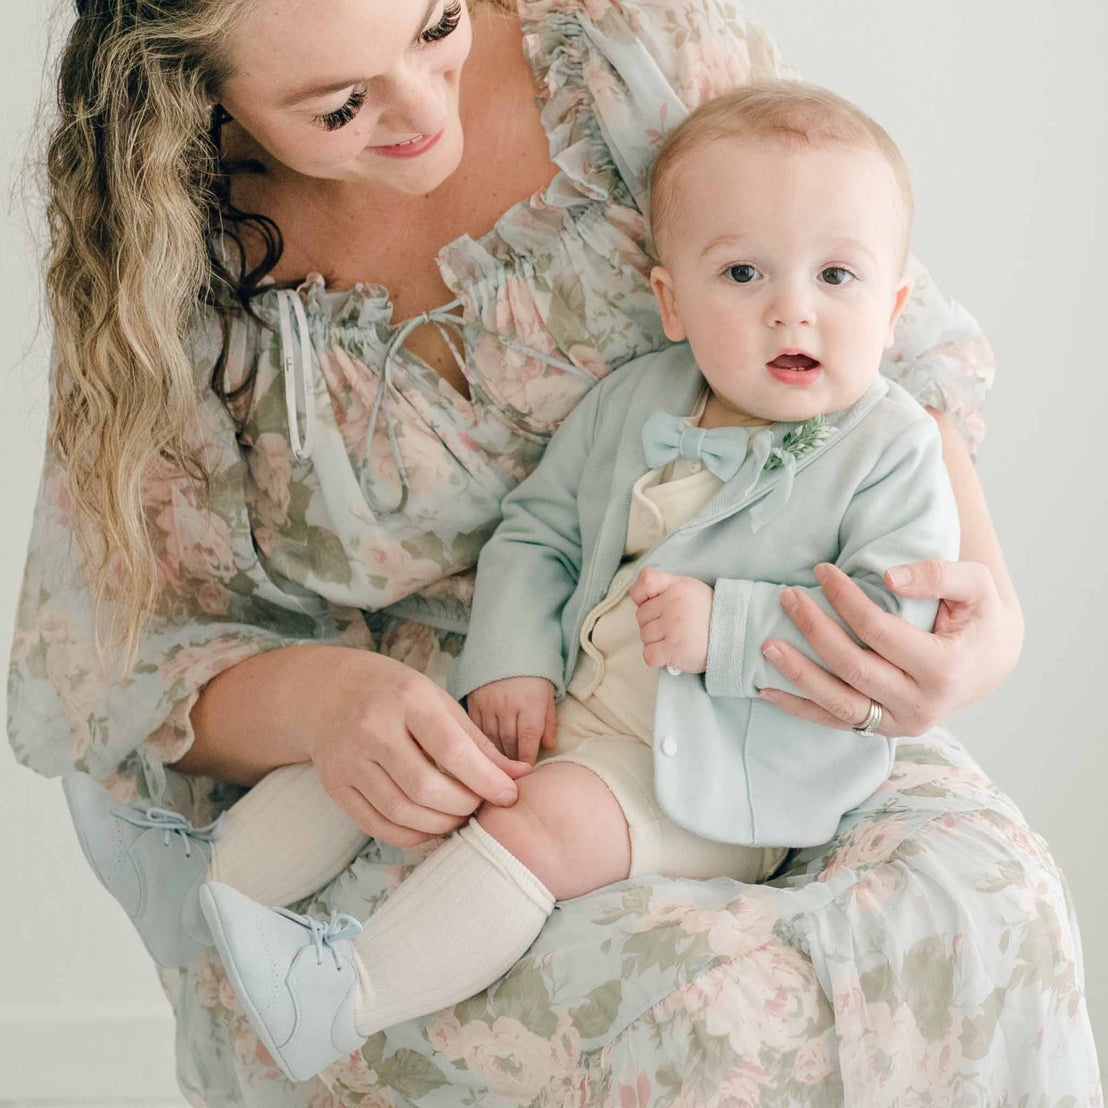 Baby boy sitting on his mother's lap. He is wearing the Ezra 4-Piece Powder Blue Suit, blue velvet bow tie and boutonniere